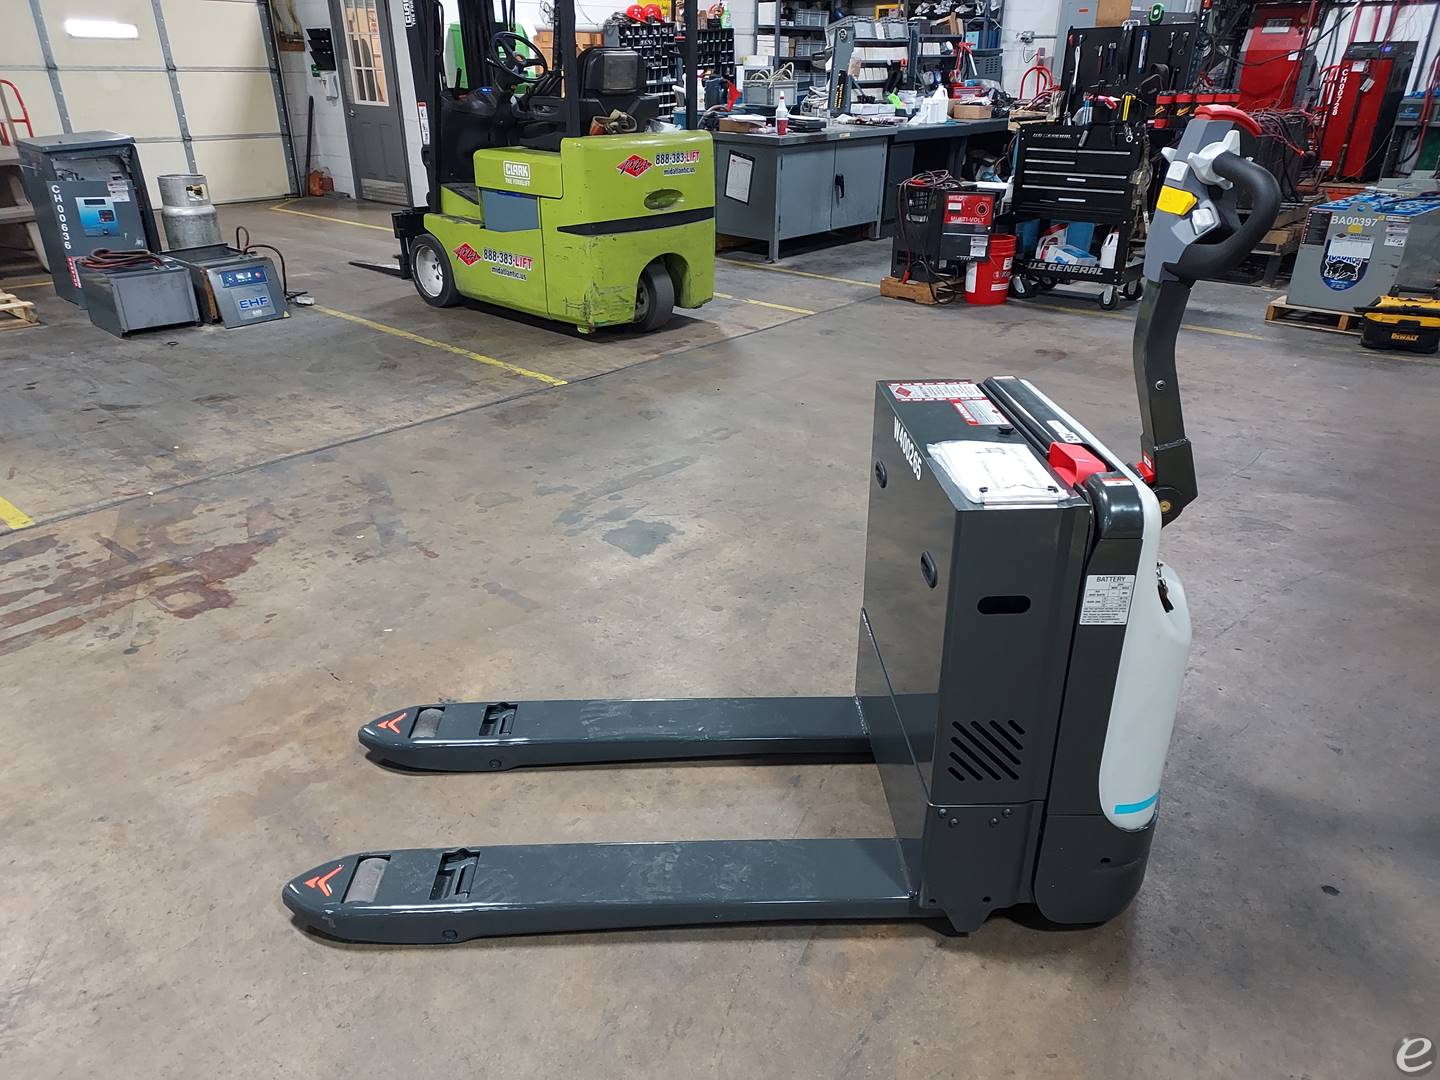 2023 Unicarriers WLX45S